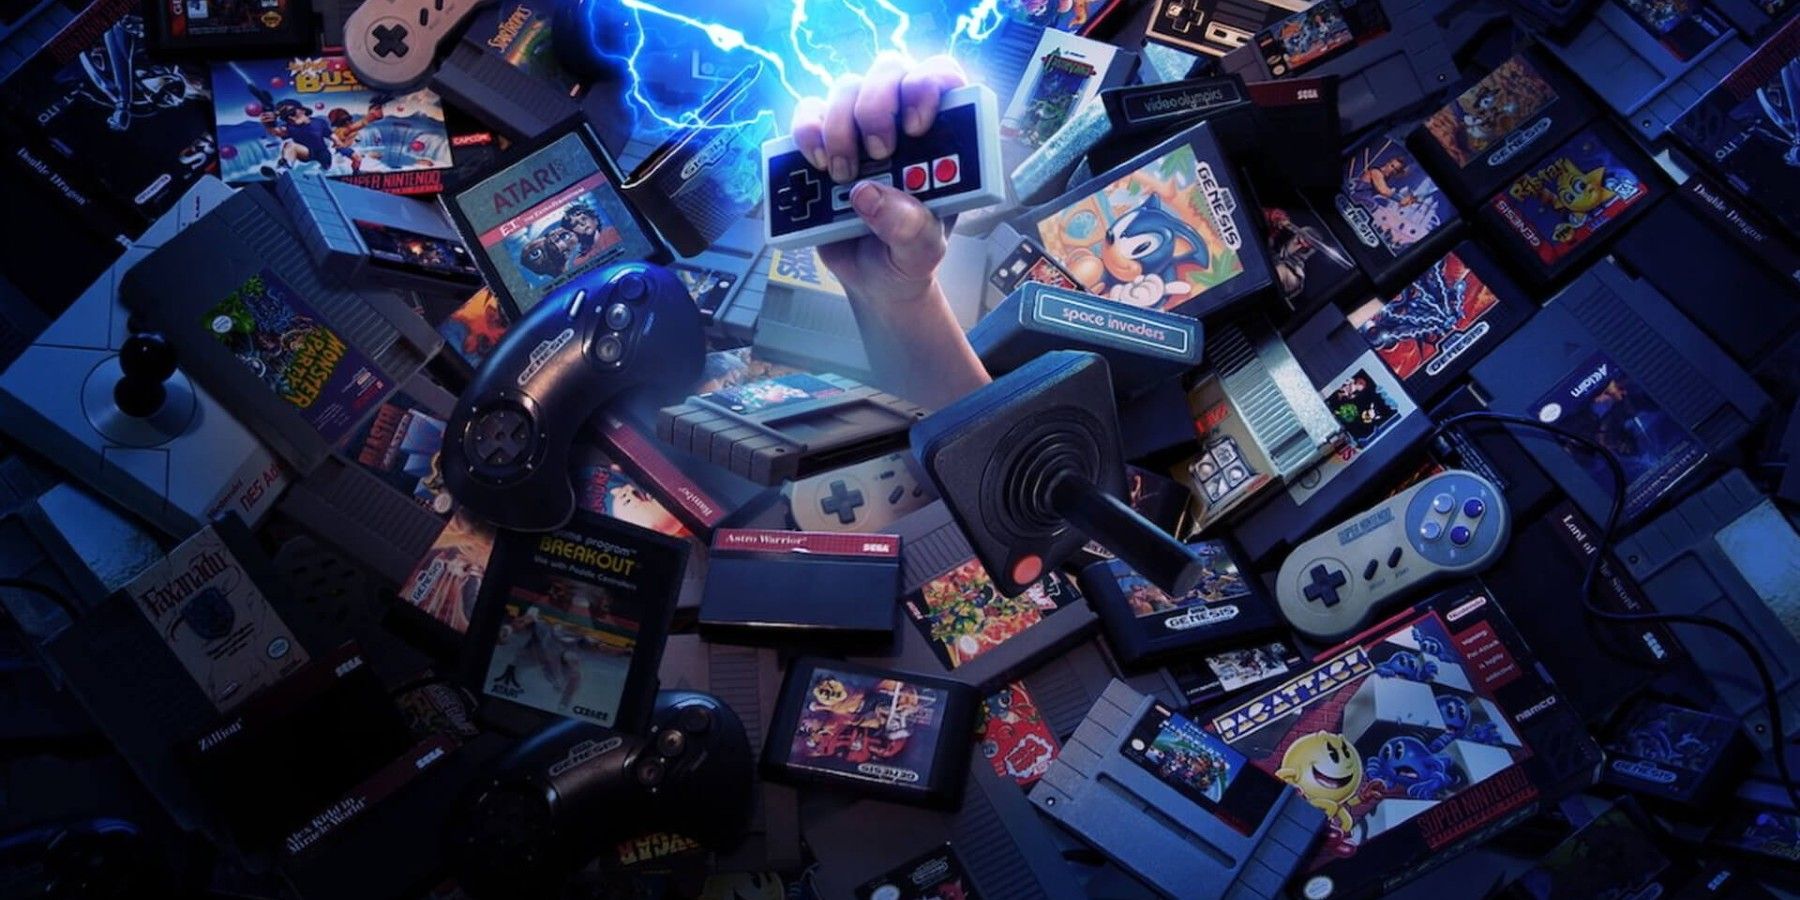 High Score TV series promo image of collage of games, controllers, hand grabbing NES controller